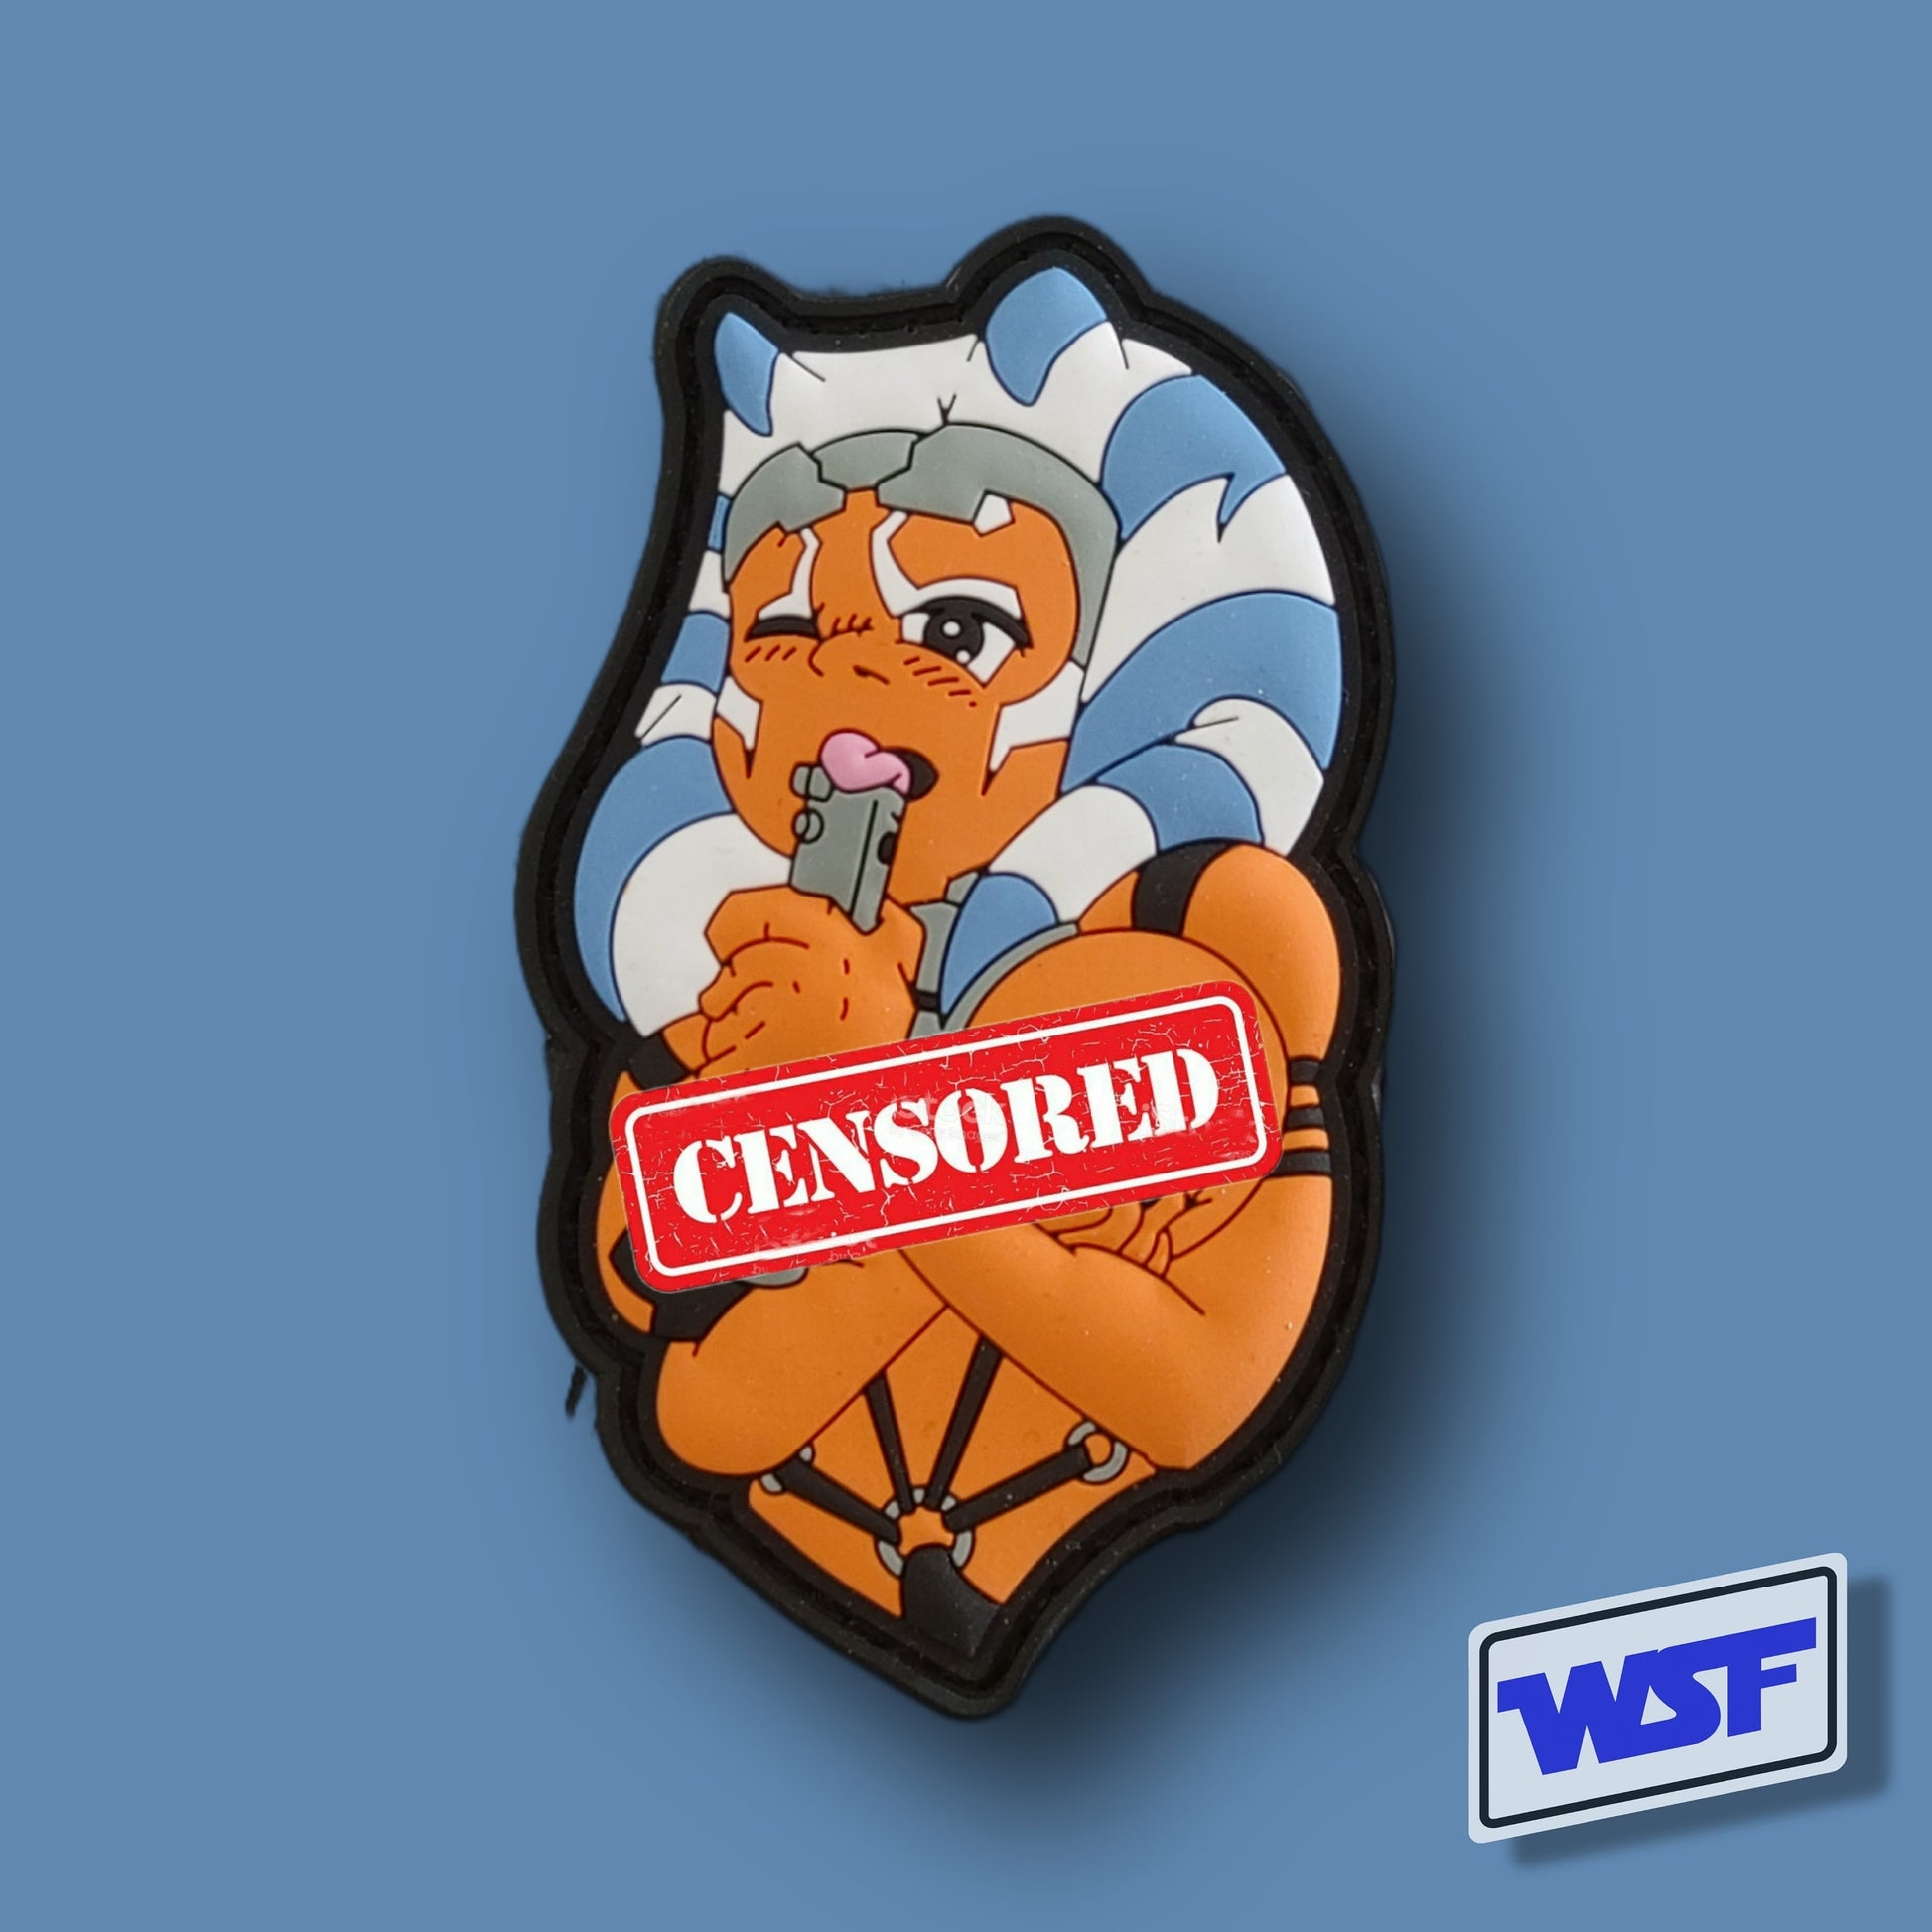 Master - Ahsoka Tano Lightsaber - PVC Tactical Morale Patch Unique Star Wars Anakin Inspired Anime Lewd Gift